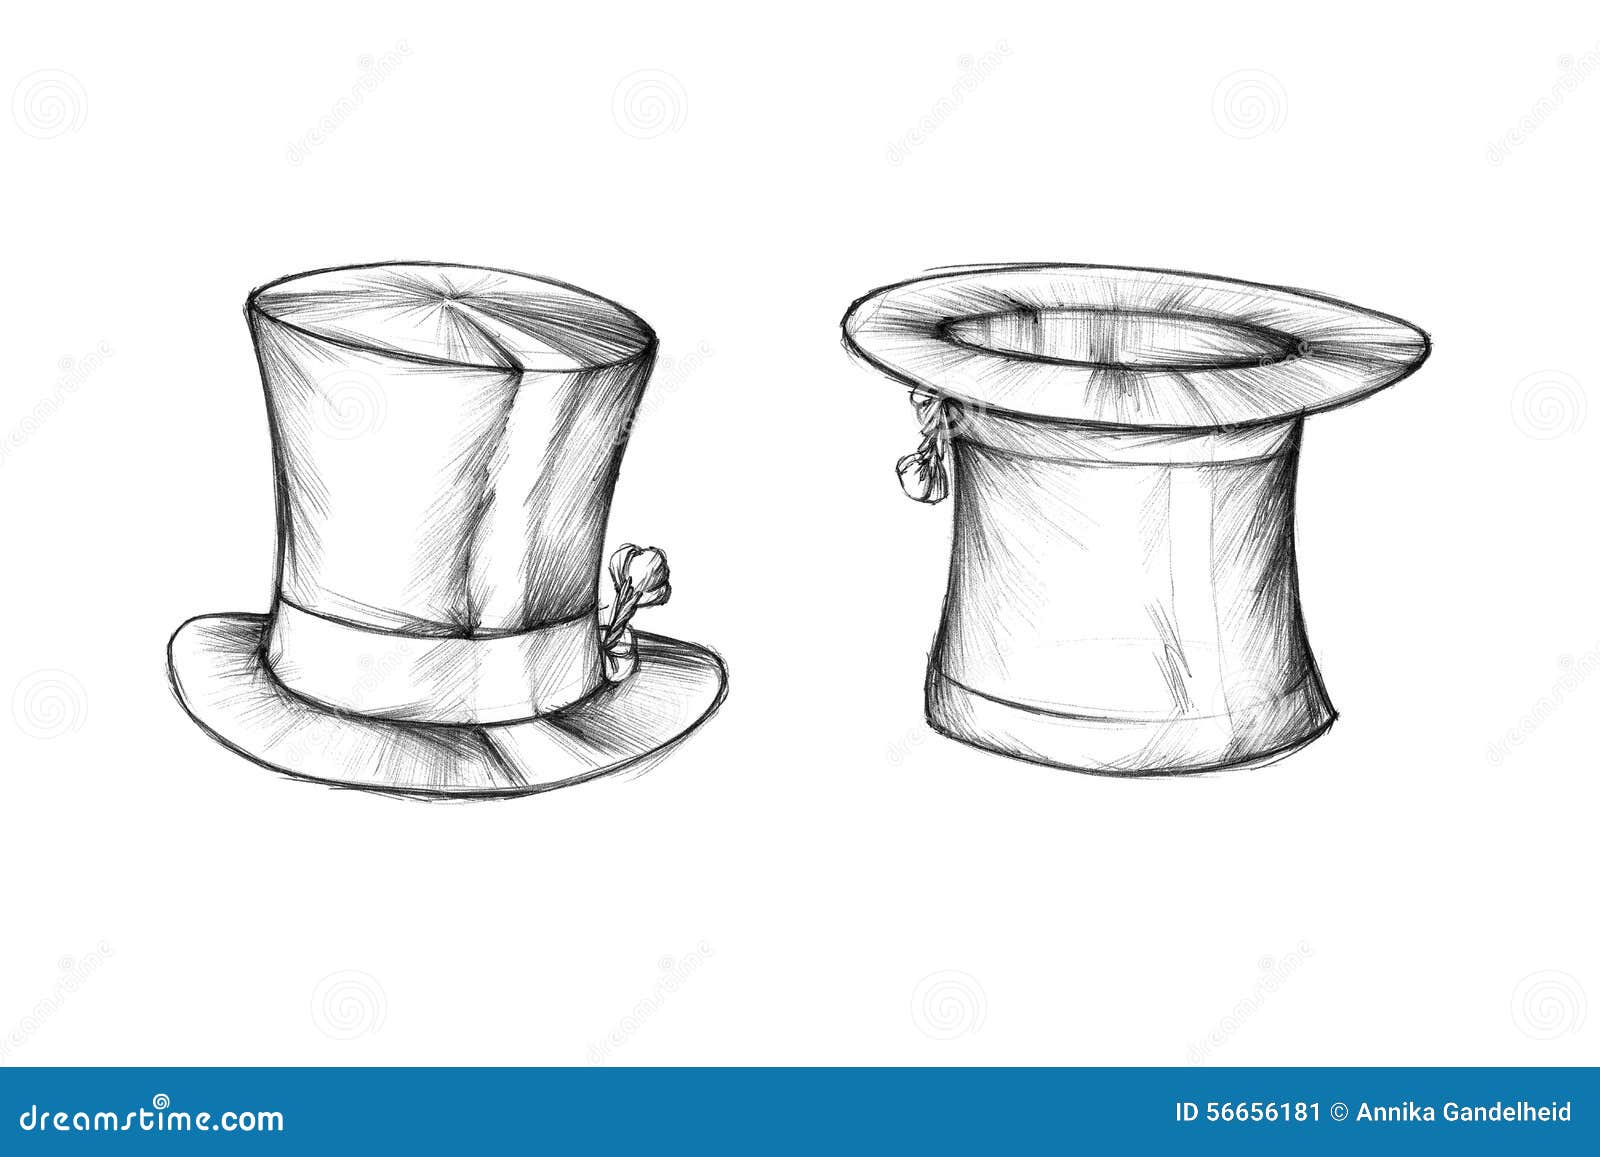 two hats from different perspectives